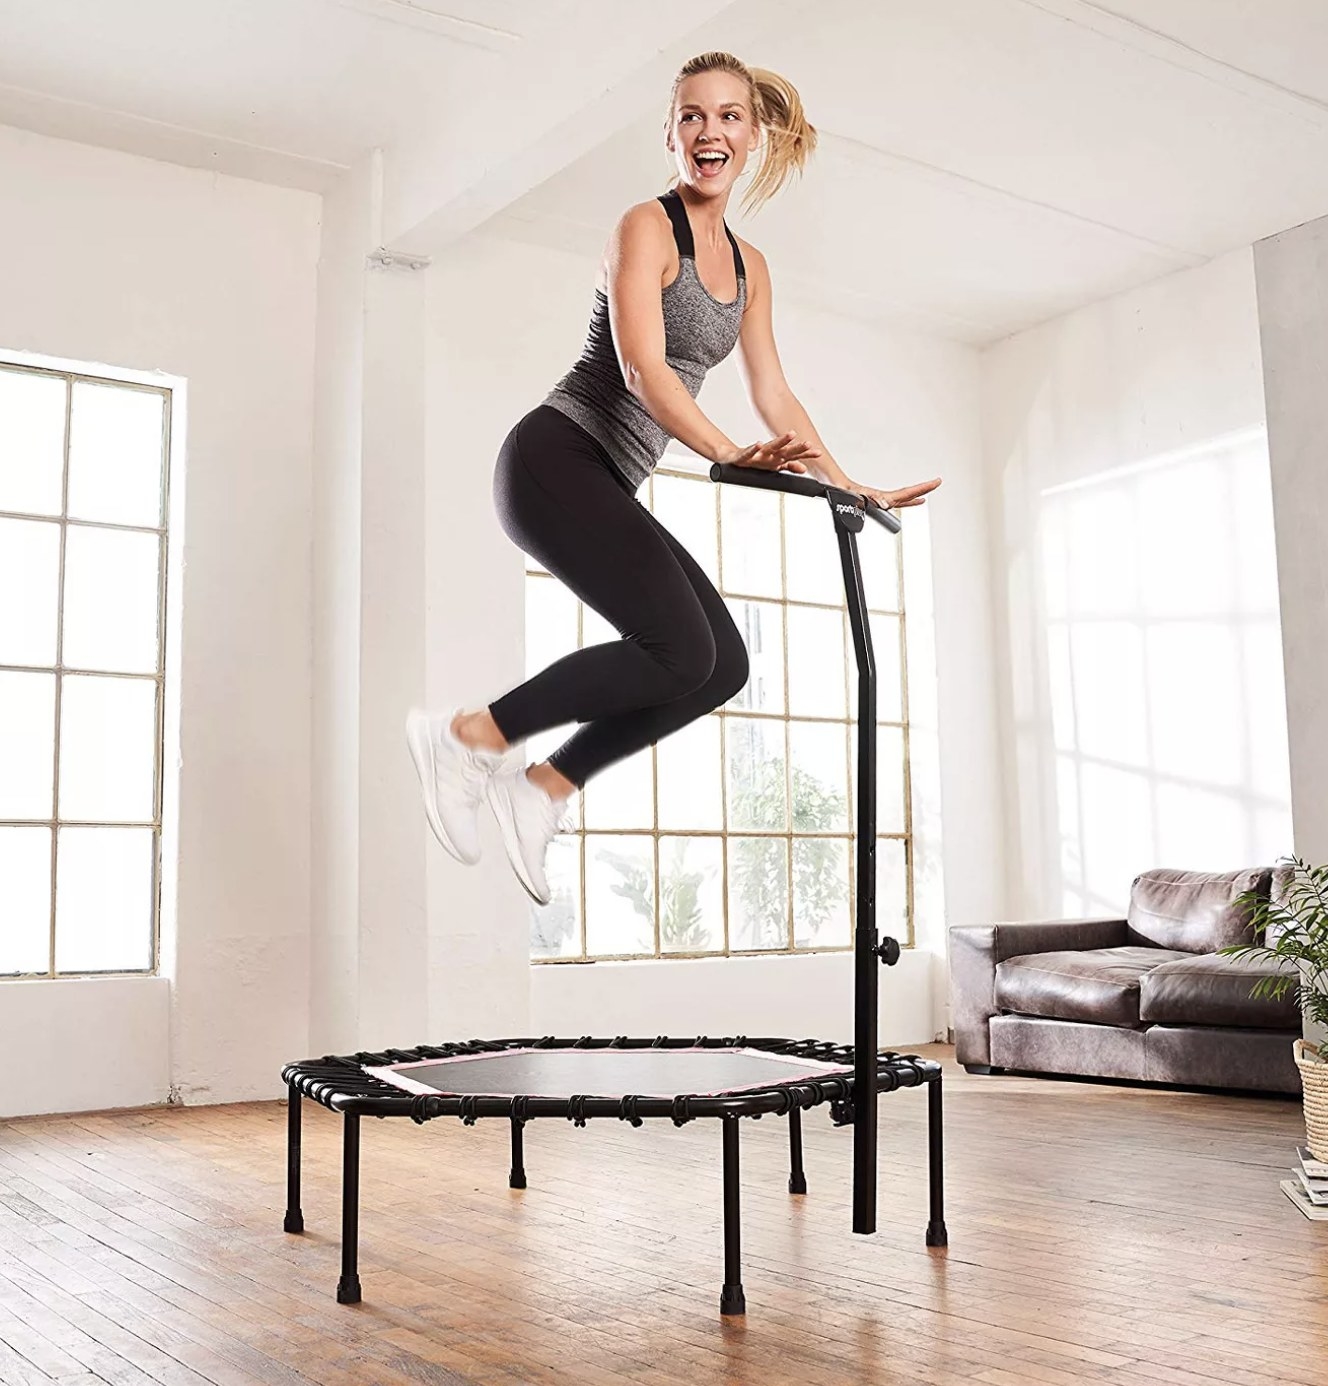 Person is jumping on a fitness trampoline